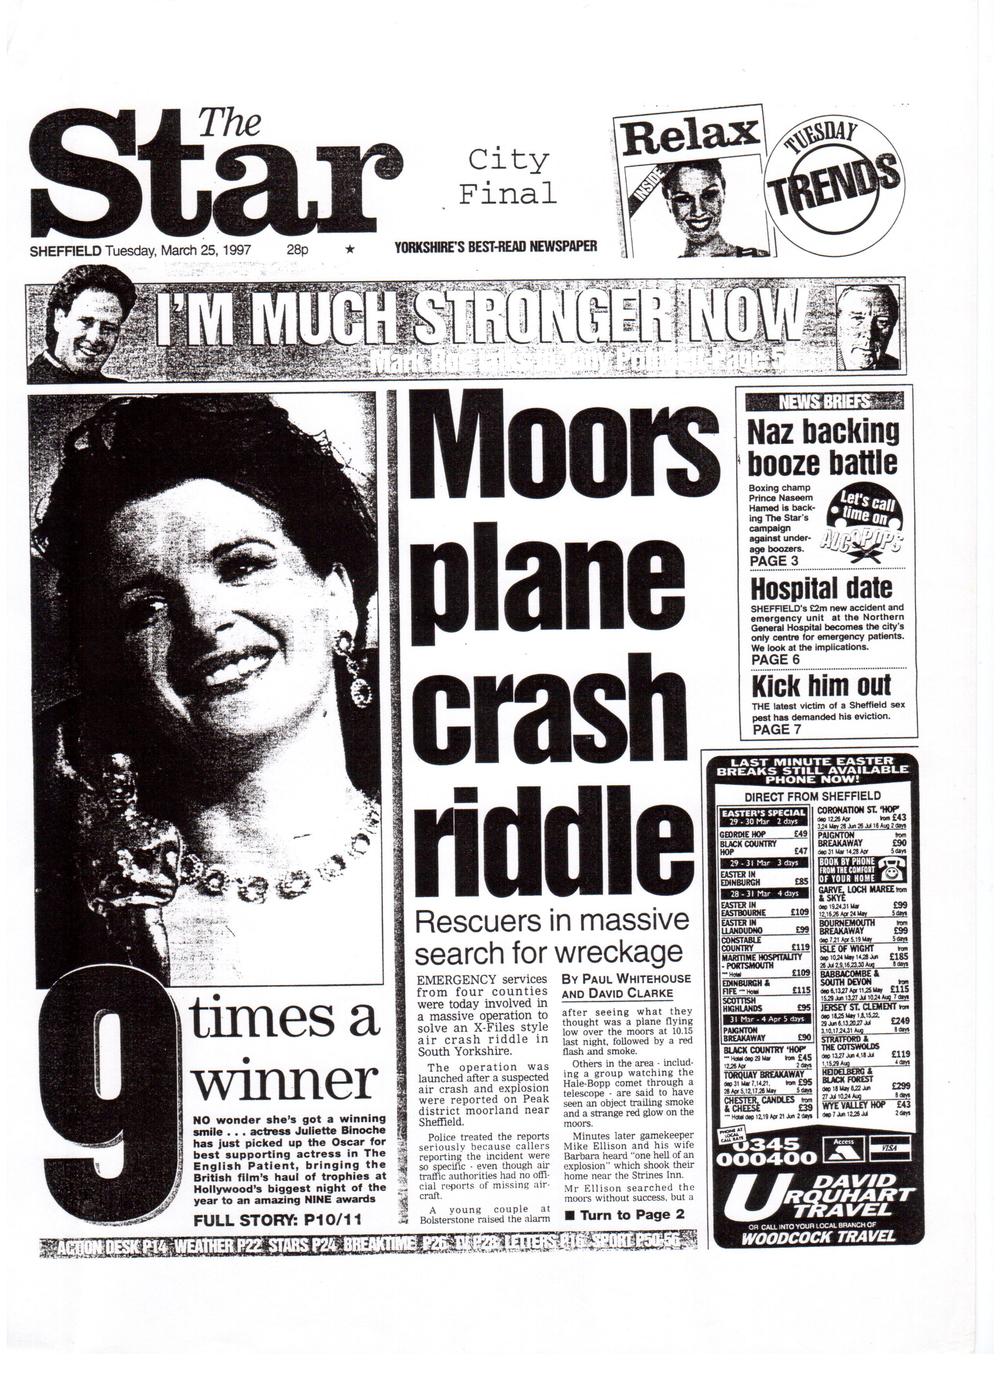 The crash that never was... Original article in The Sheffield Star, March 25th 1997